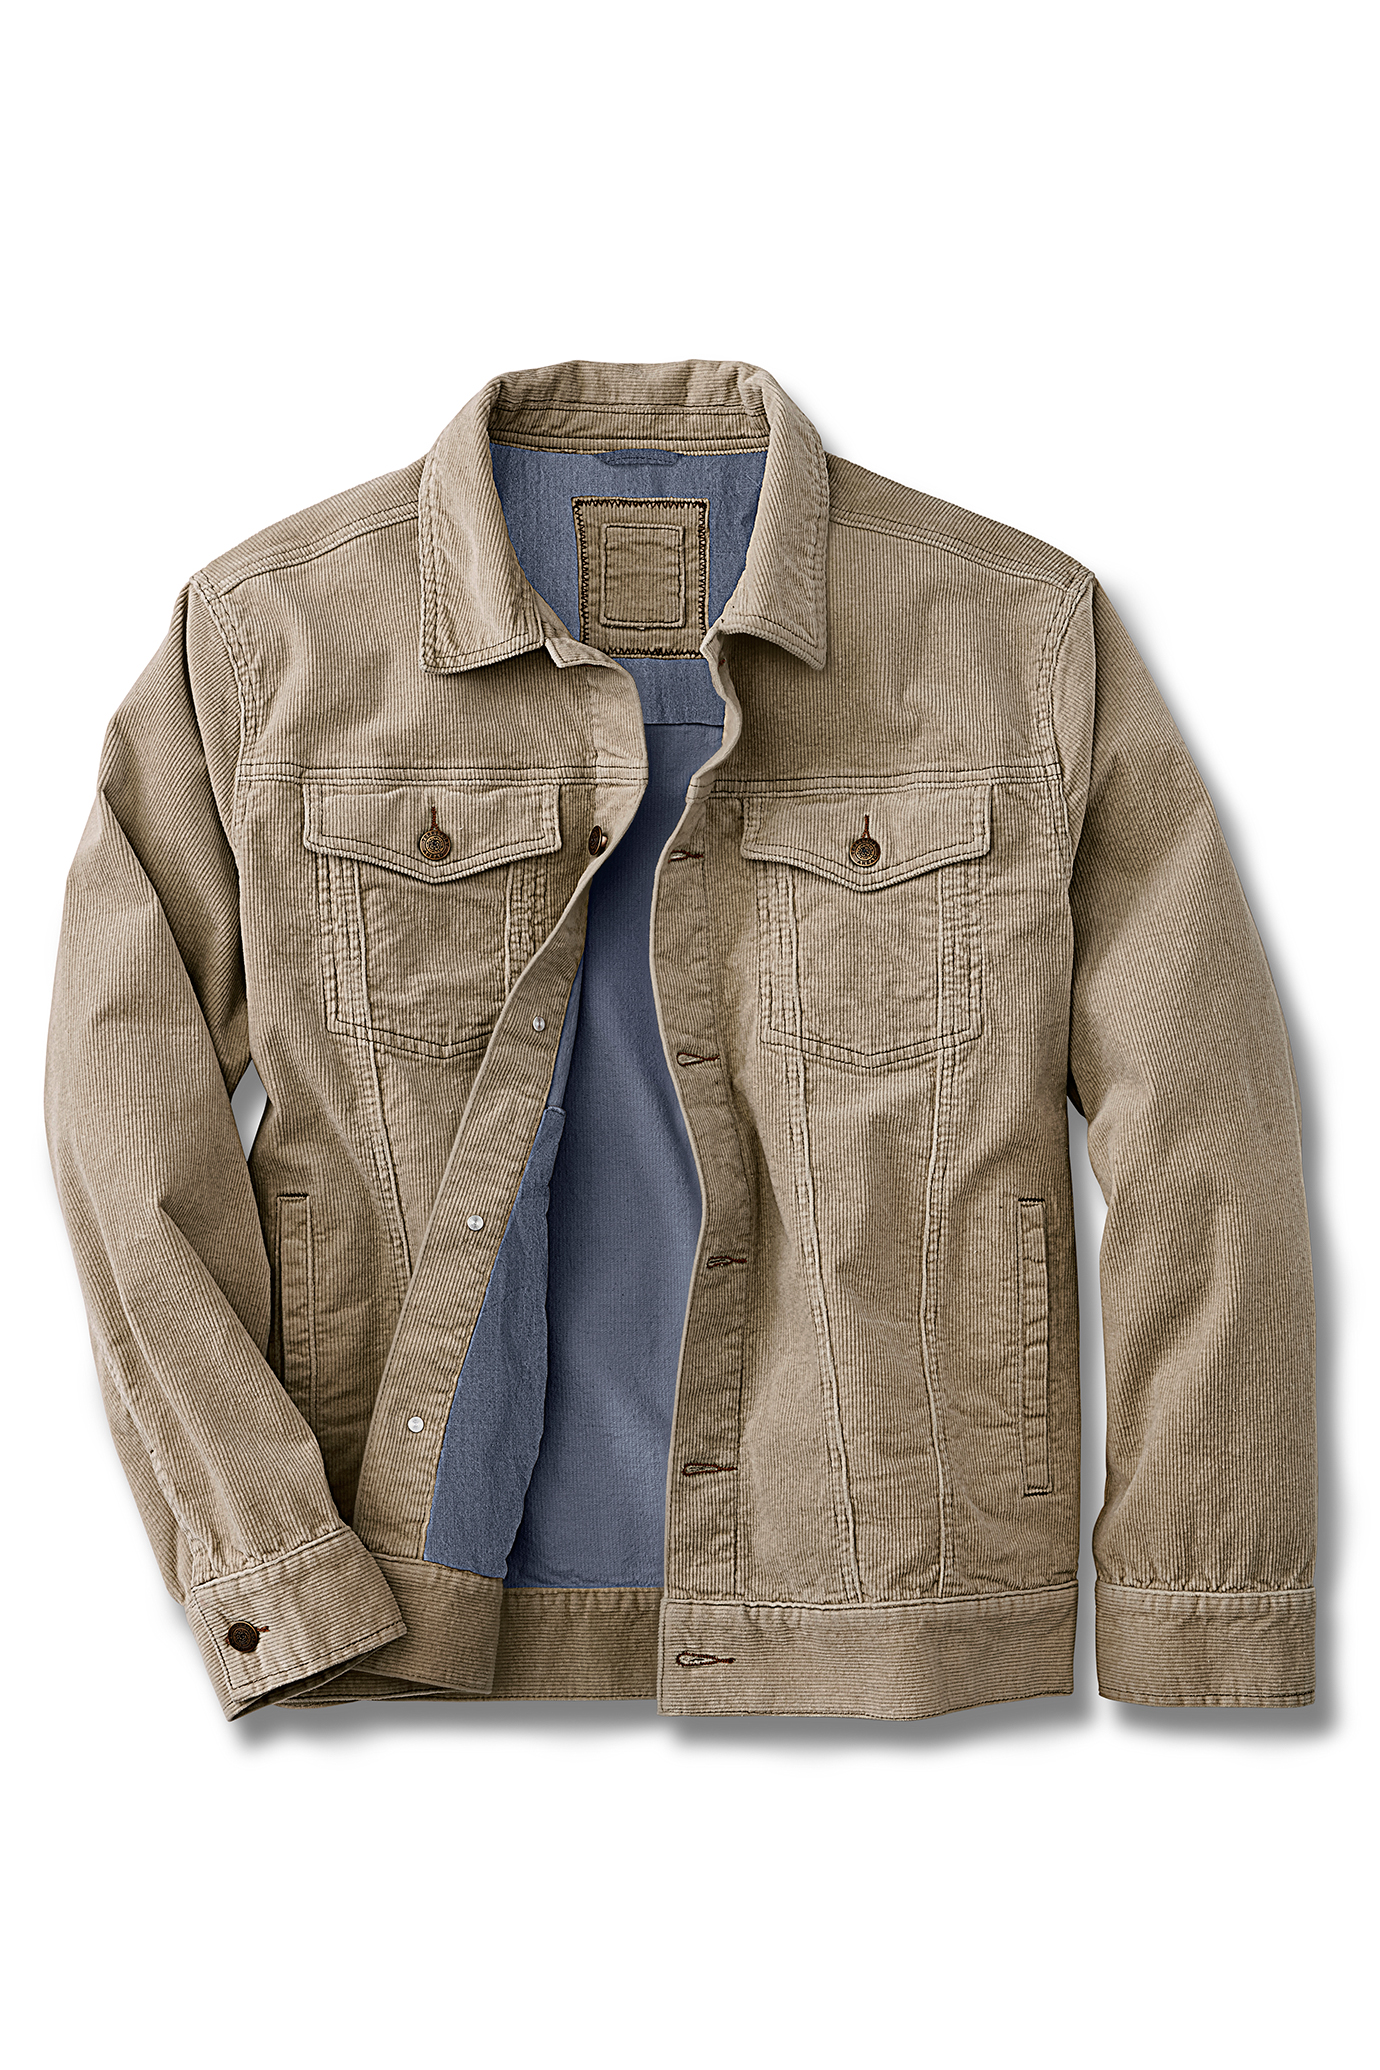 Men's Apparel Brand The Territory Ahead Goes Head-to-Toe with Corduroy ...